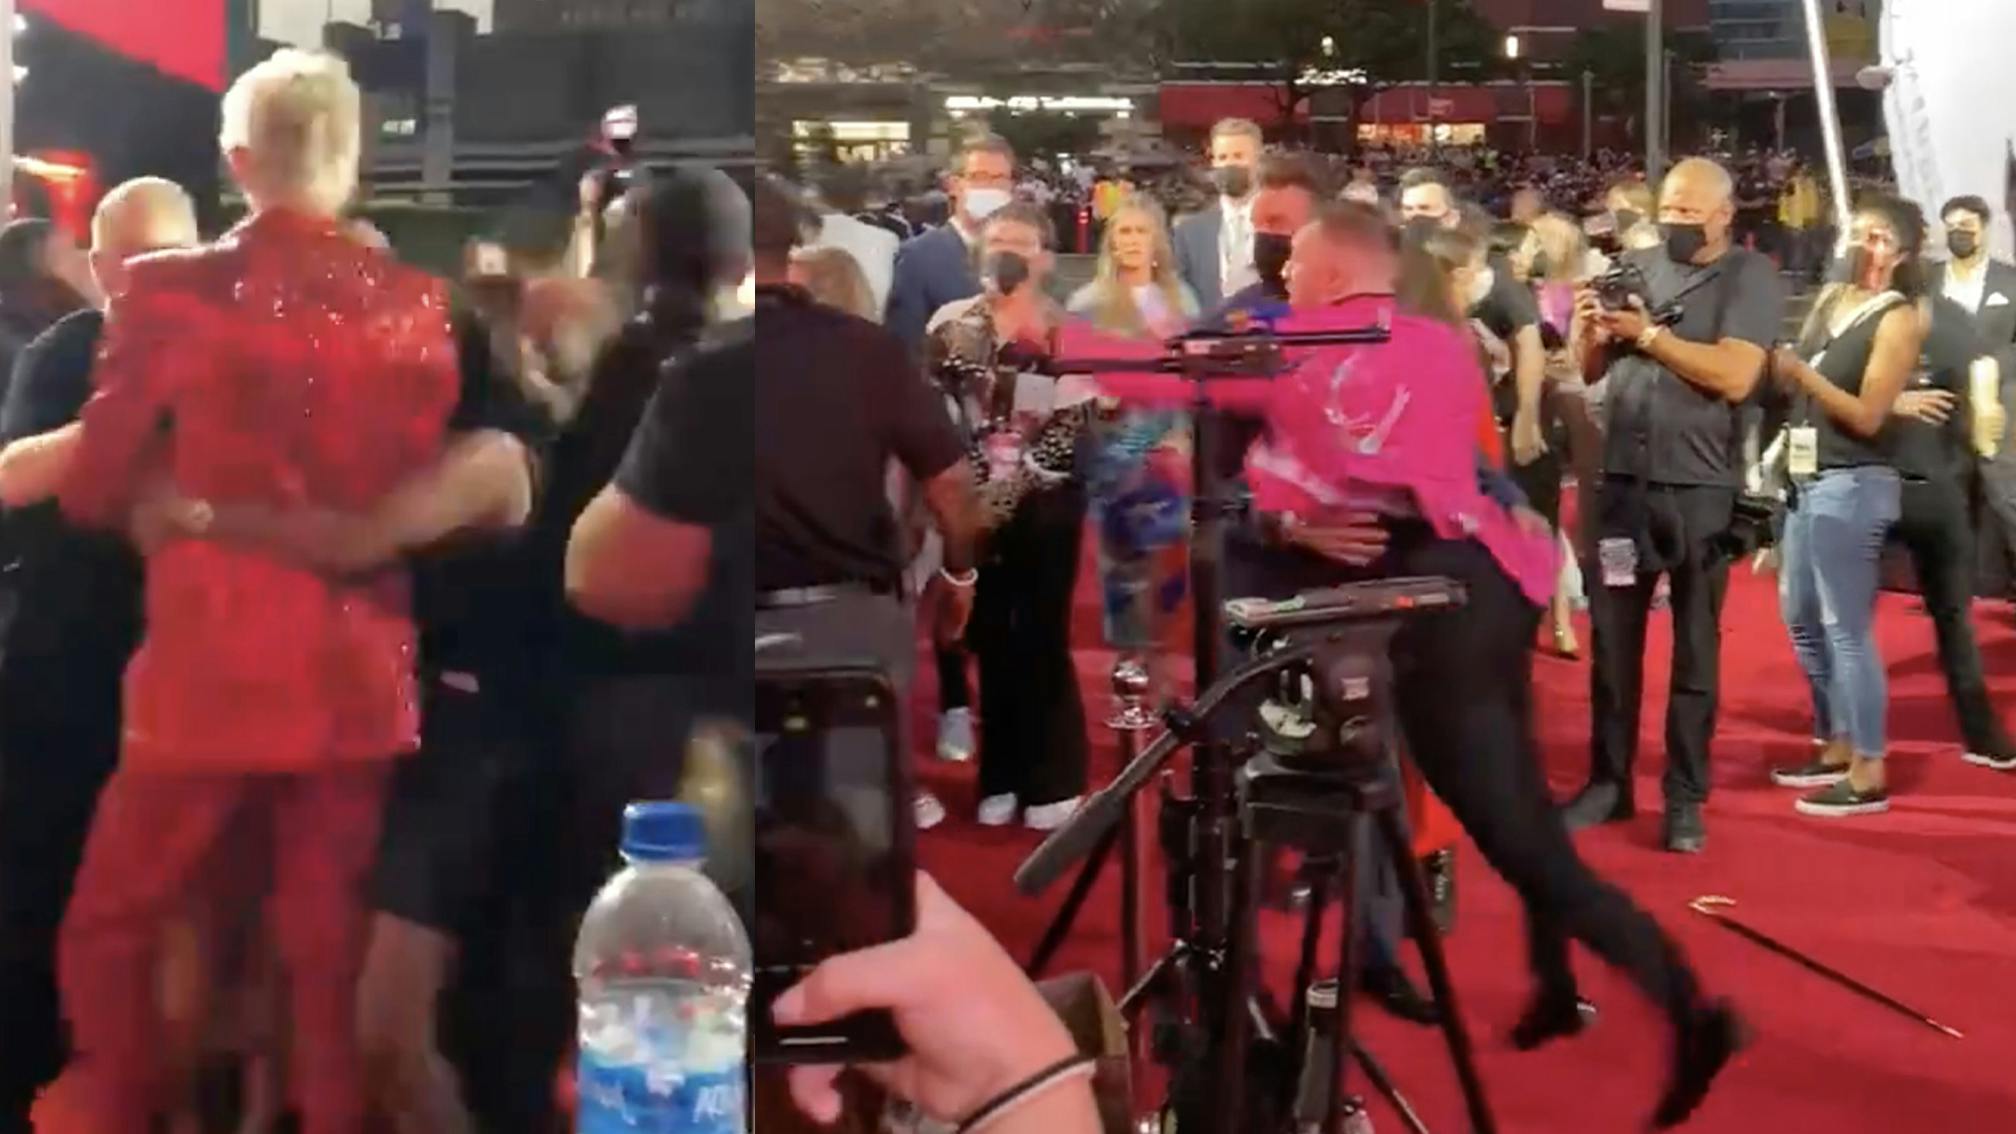 MGK and Conor McGregor reportedly get into altercation on red carpet at MTV VMAs